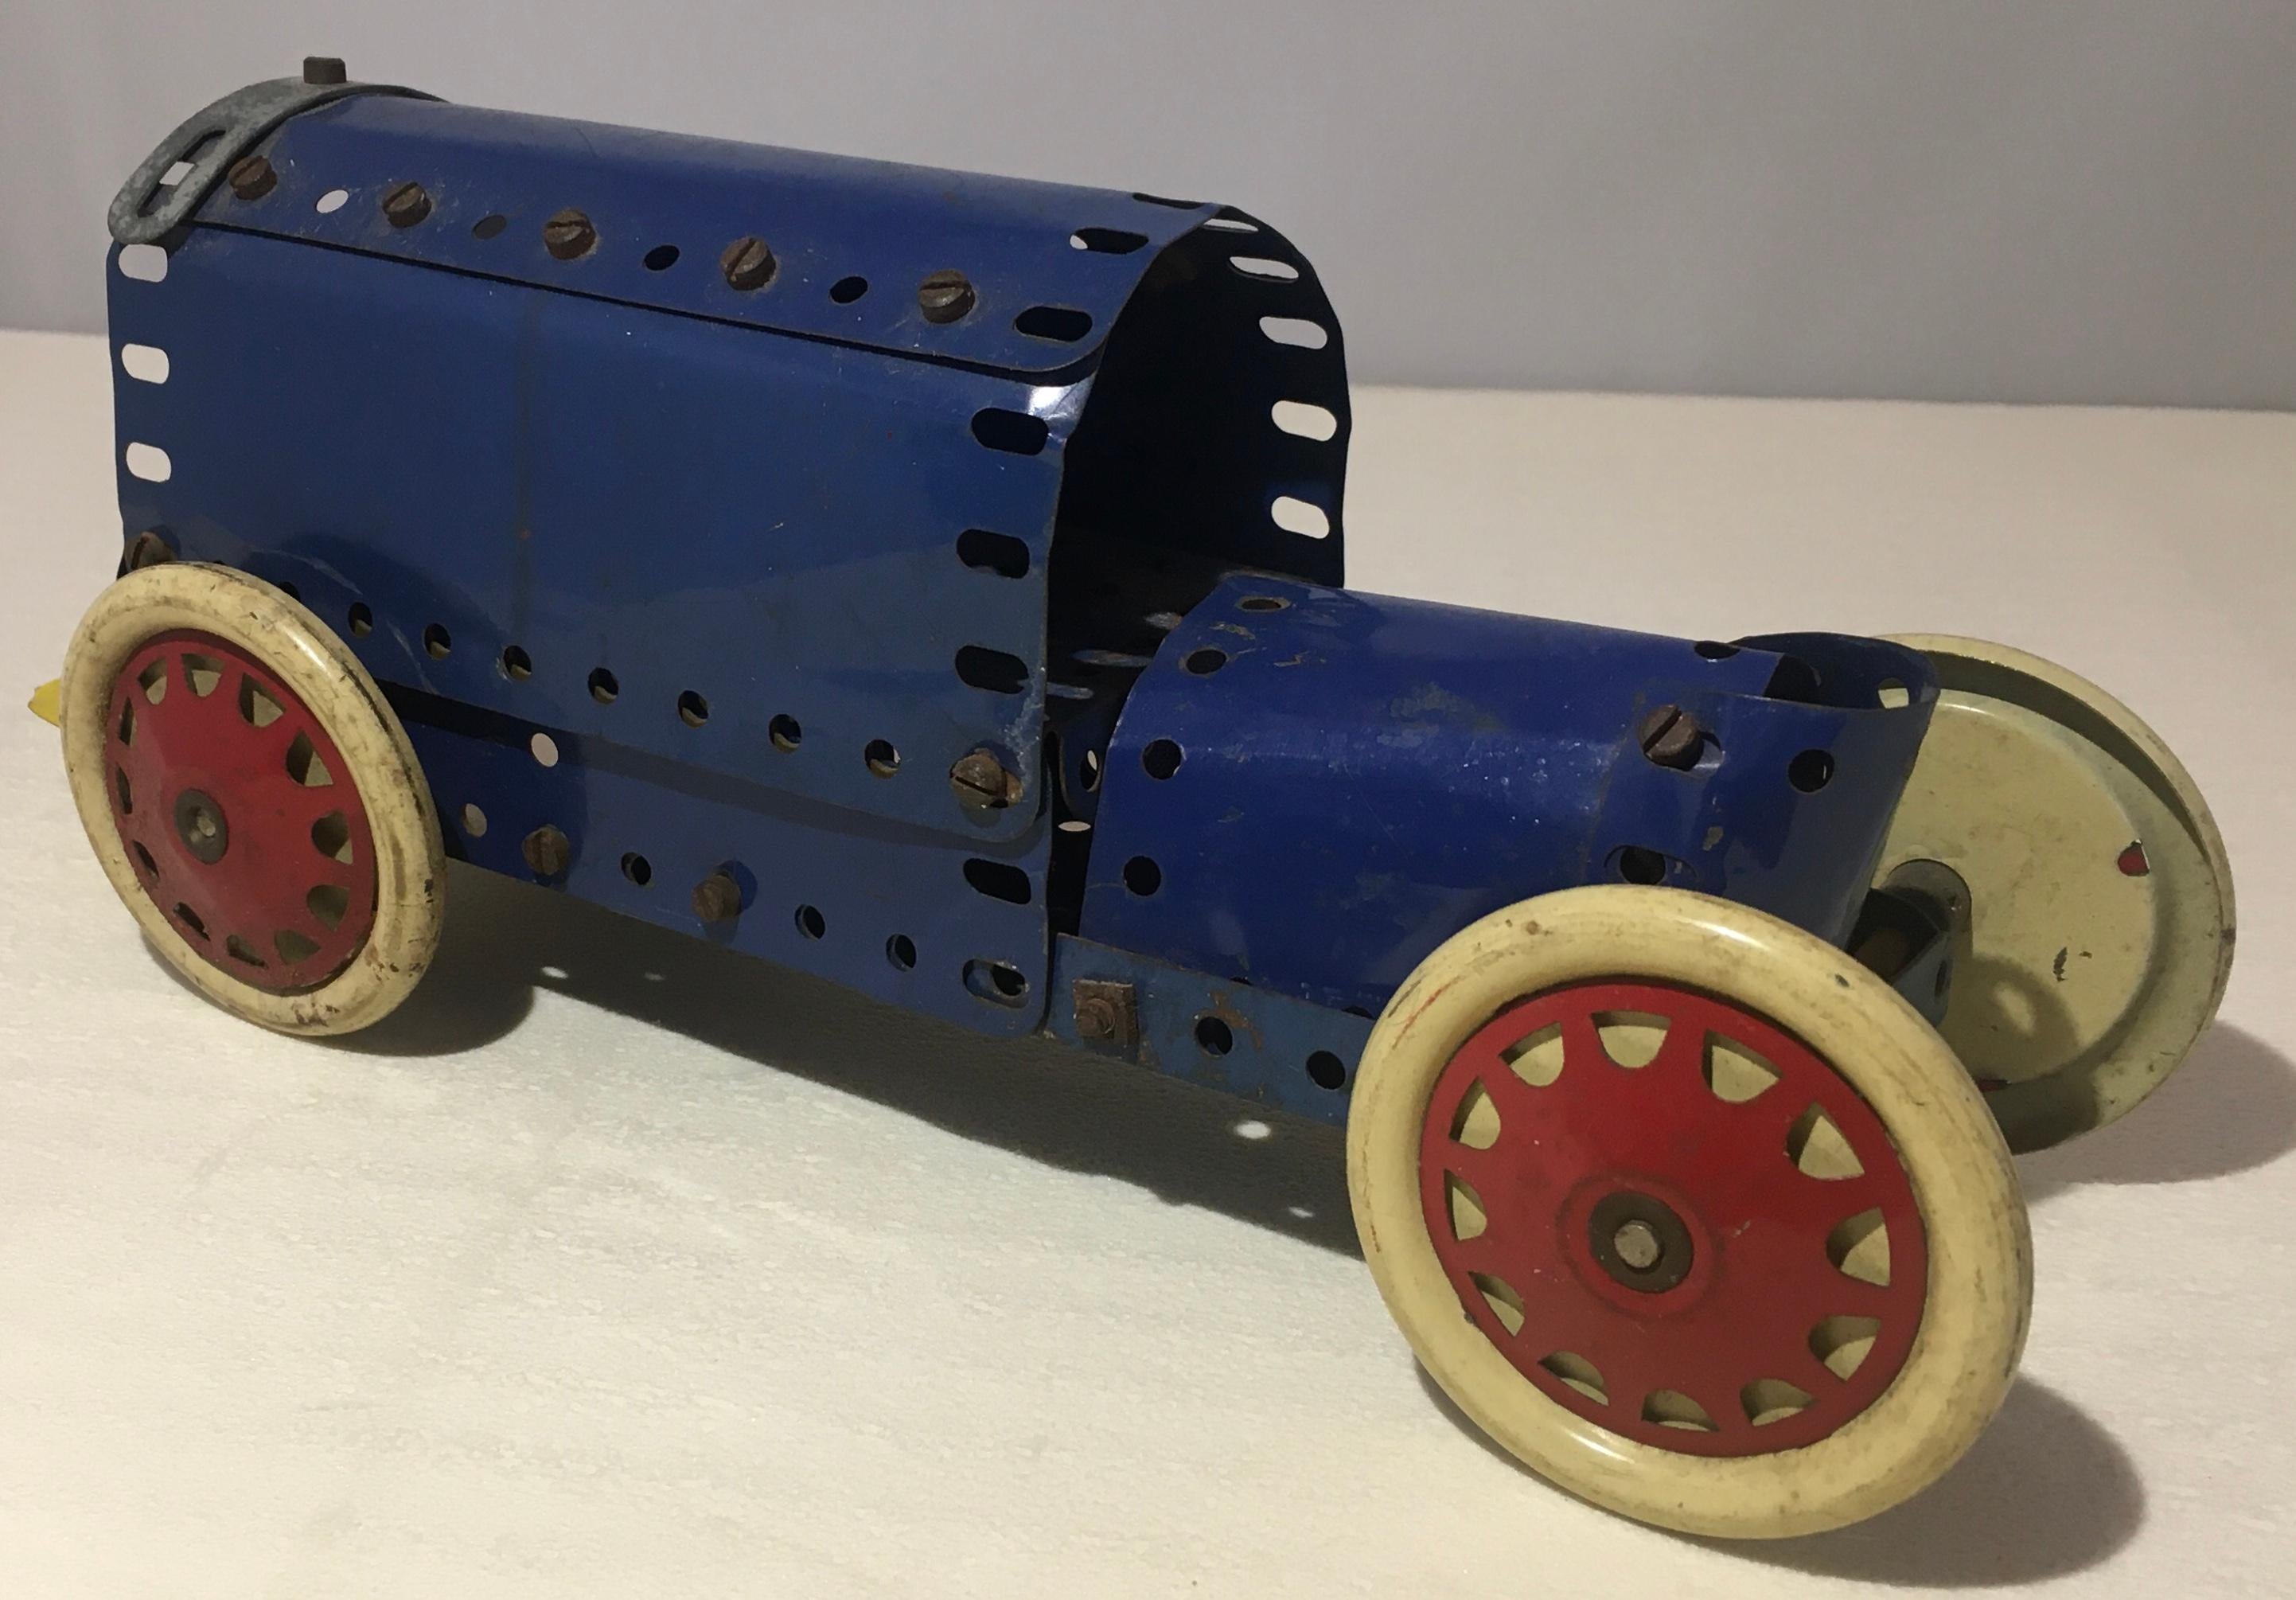 English Antique Meccano Brass Display Toy Car For Sale